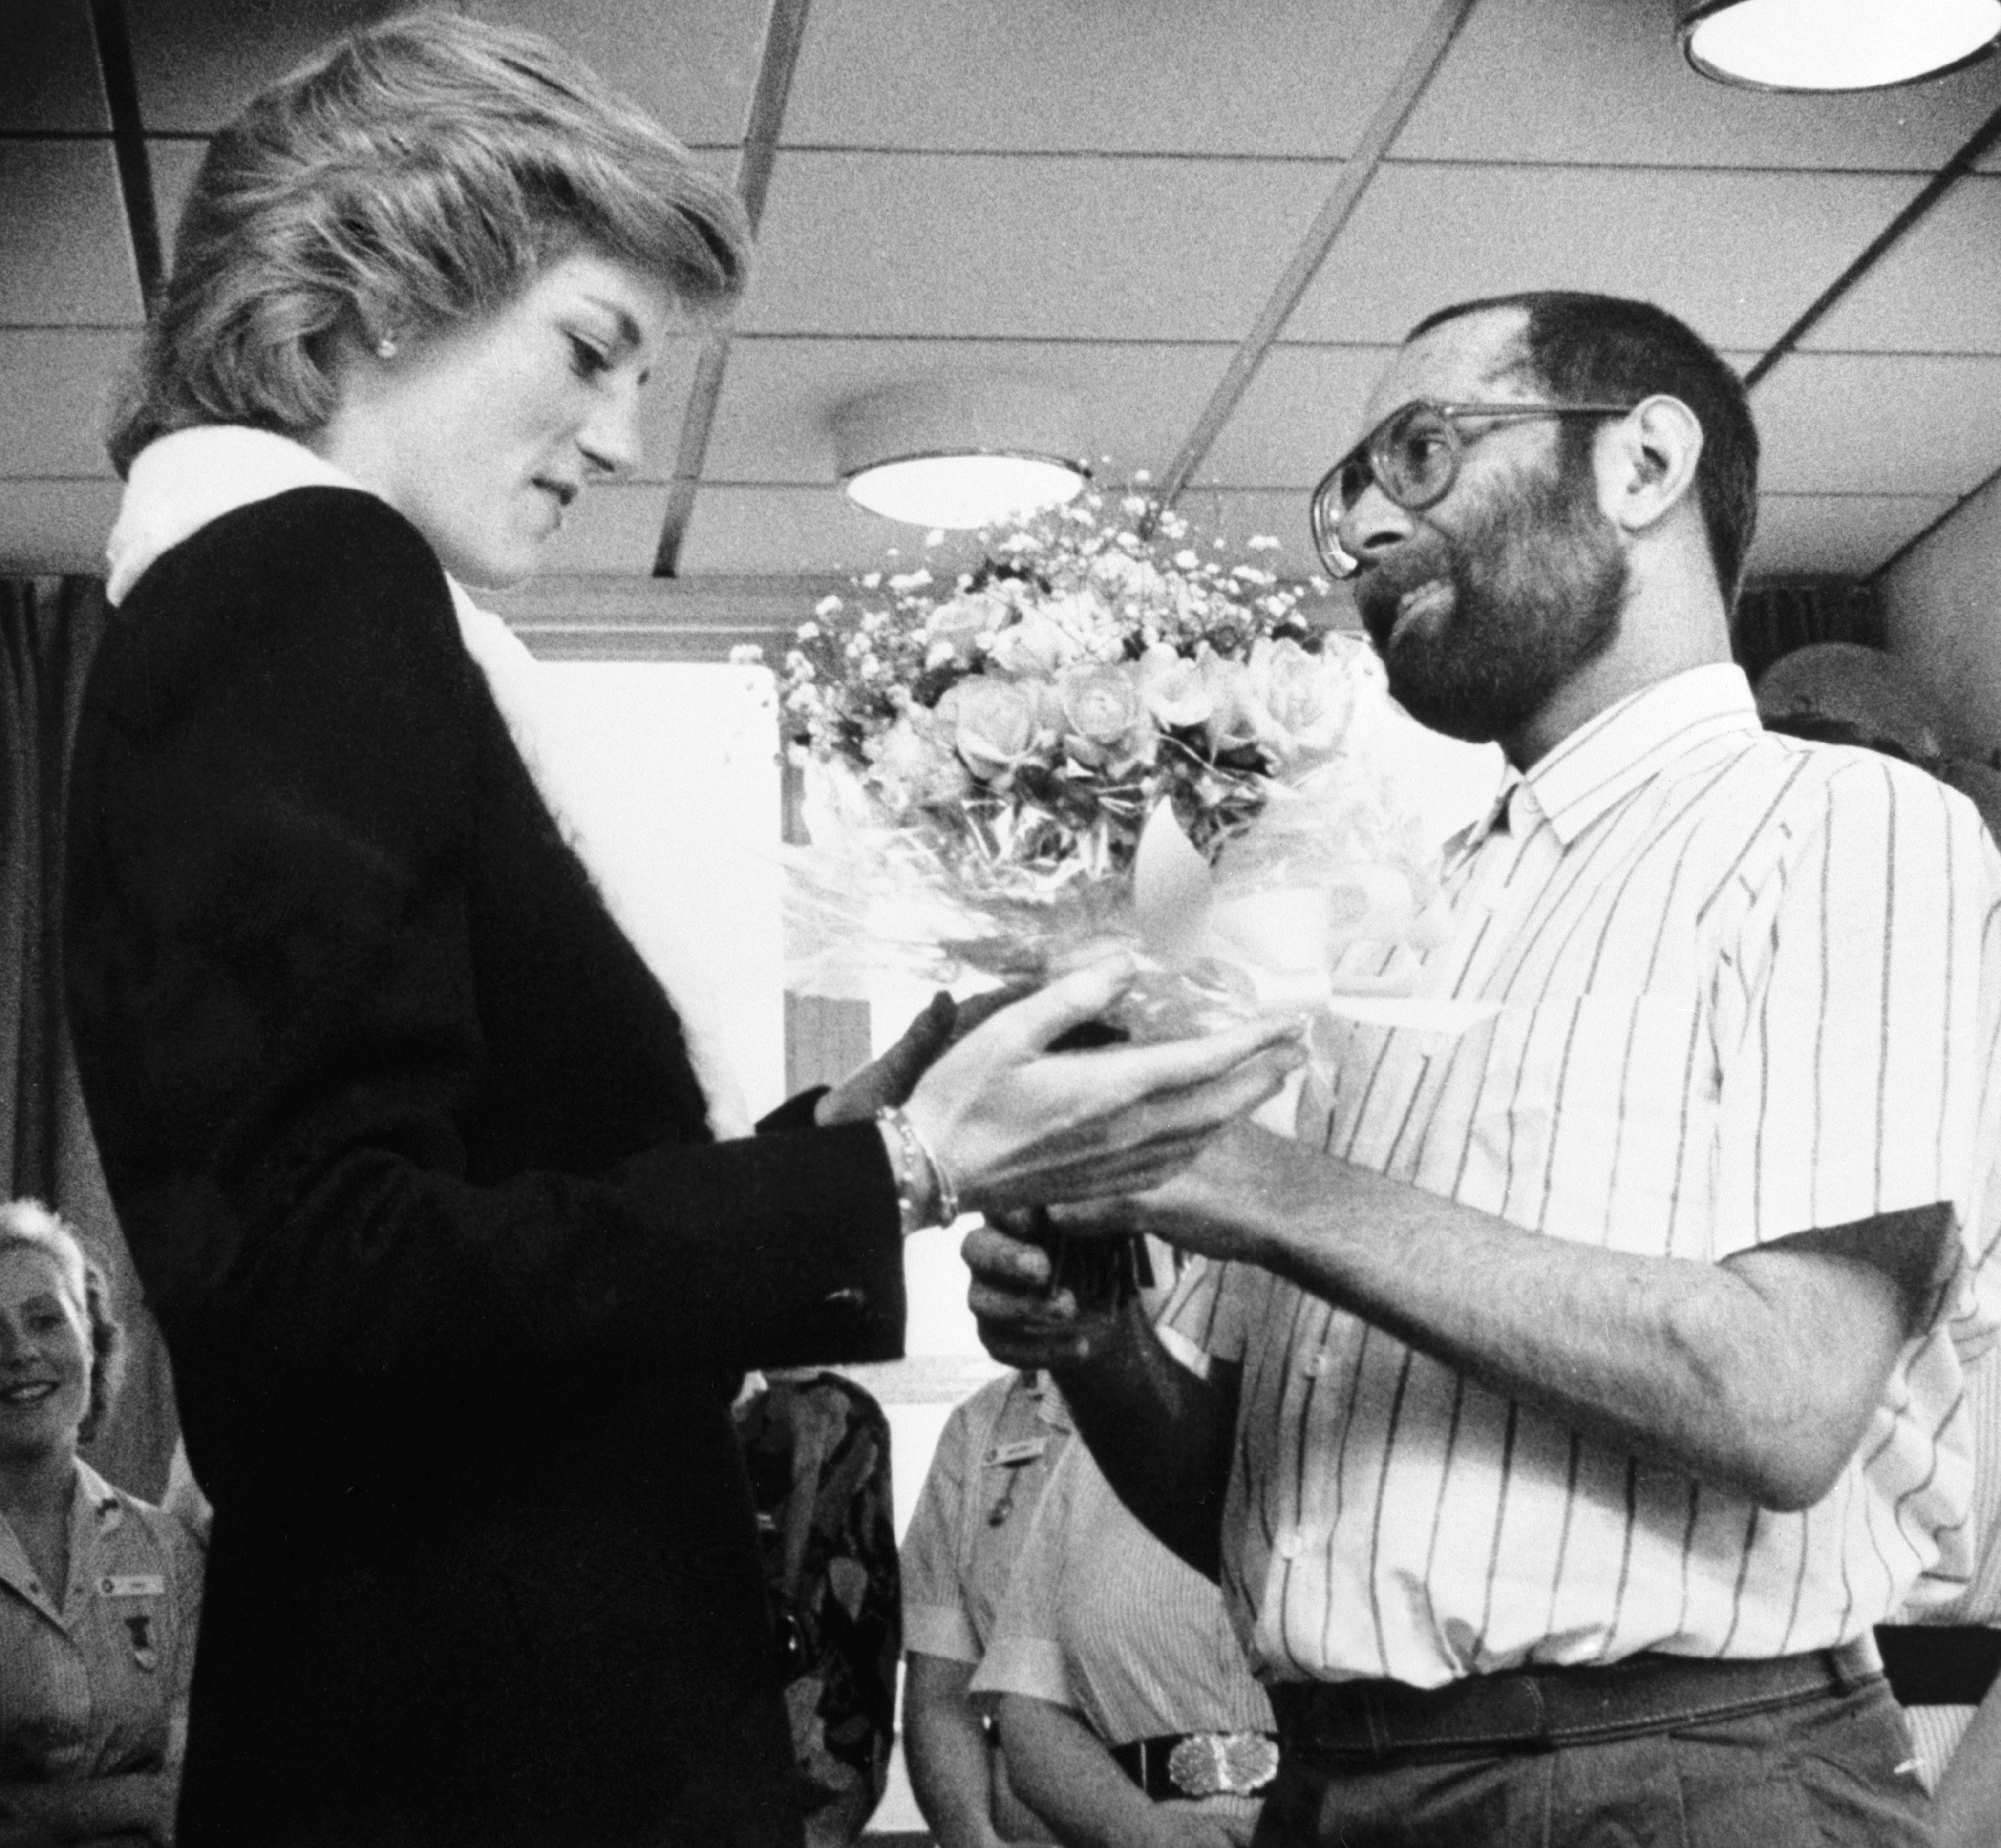 The Princess of Wales is presented with a bouquet by patient Martin Johnson during her visit to the Mildmay Mission Hospital Aids Hospice in East London in 1989 (PA)